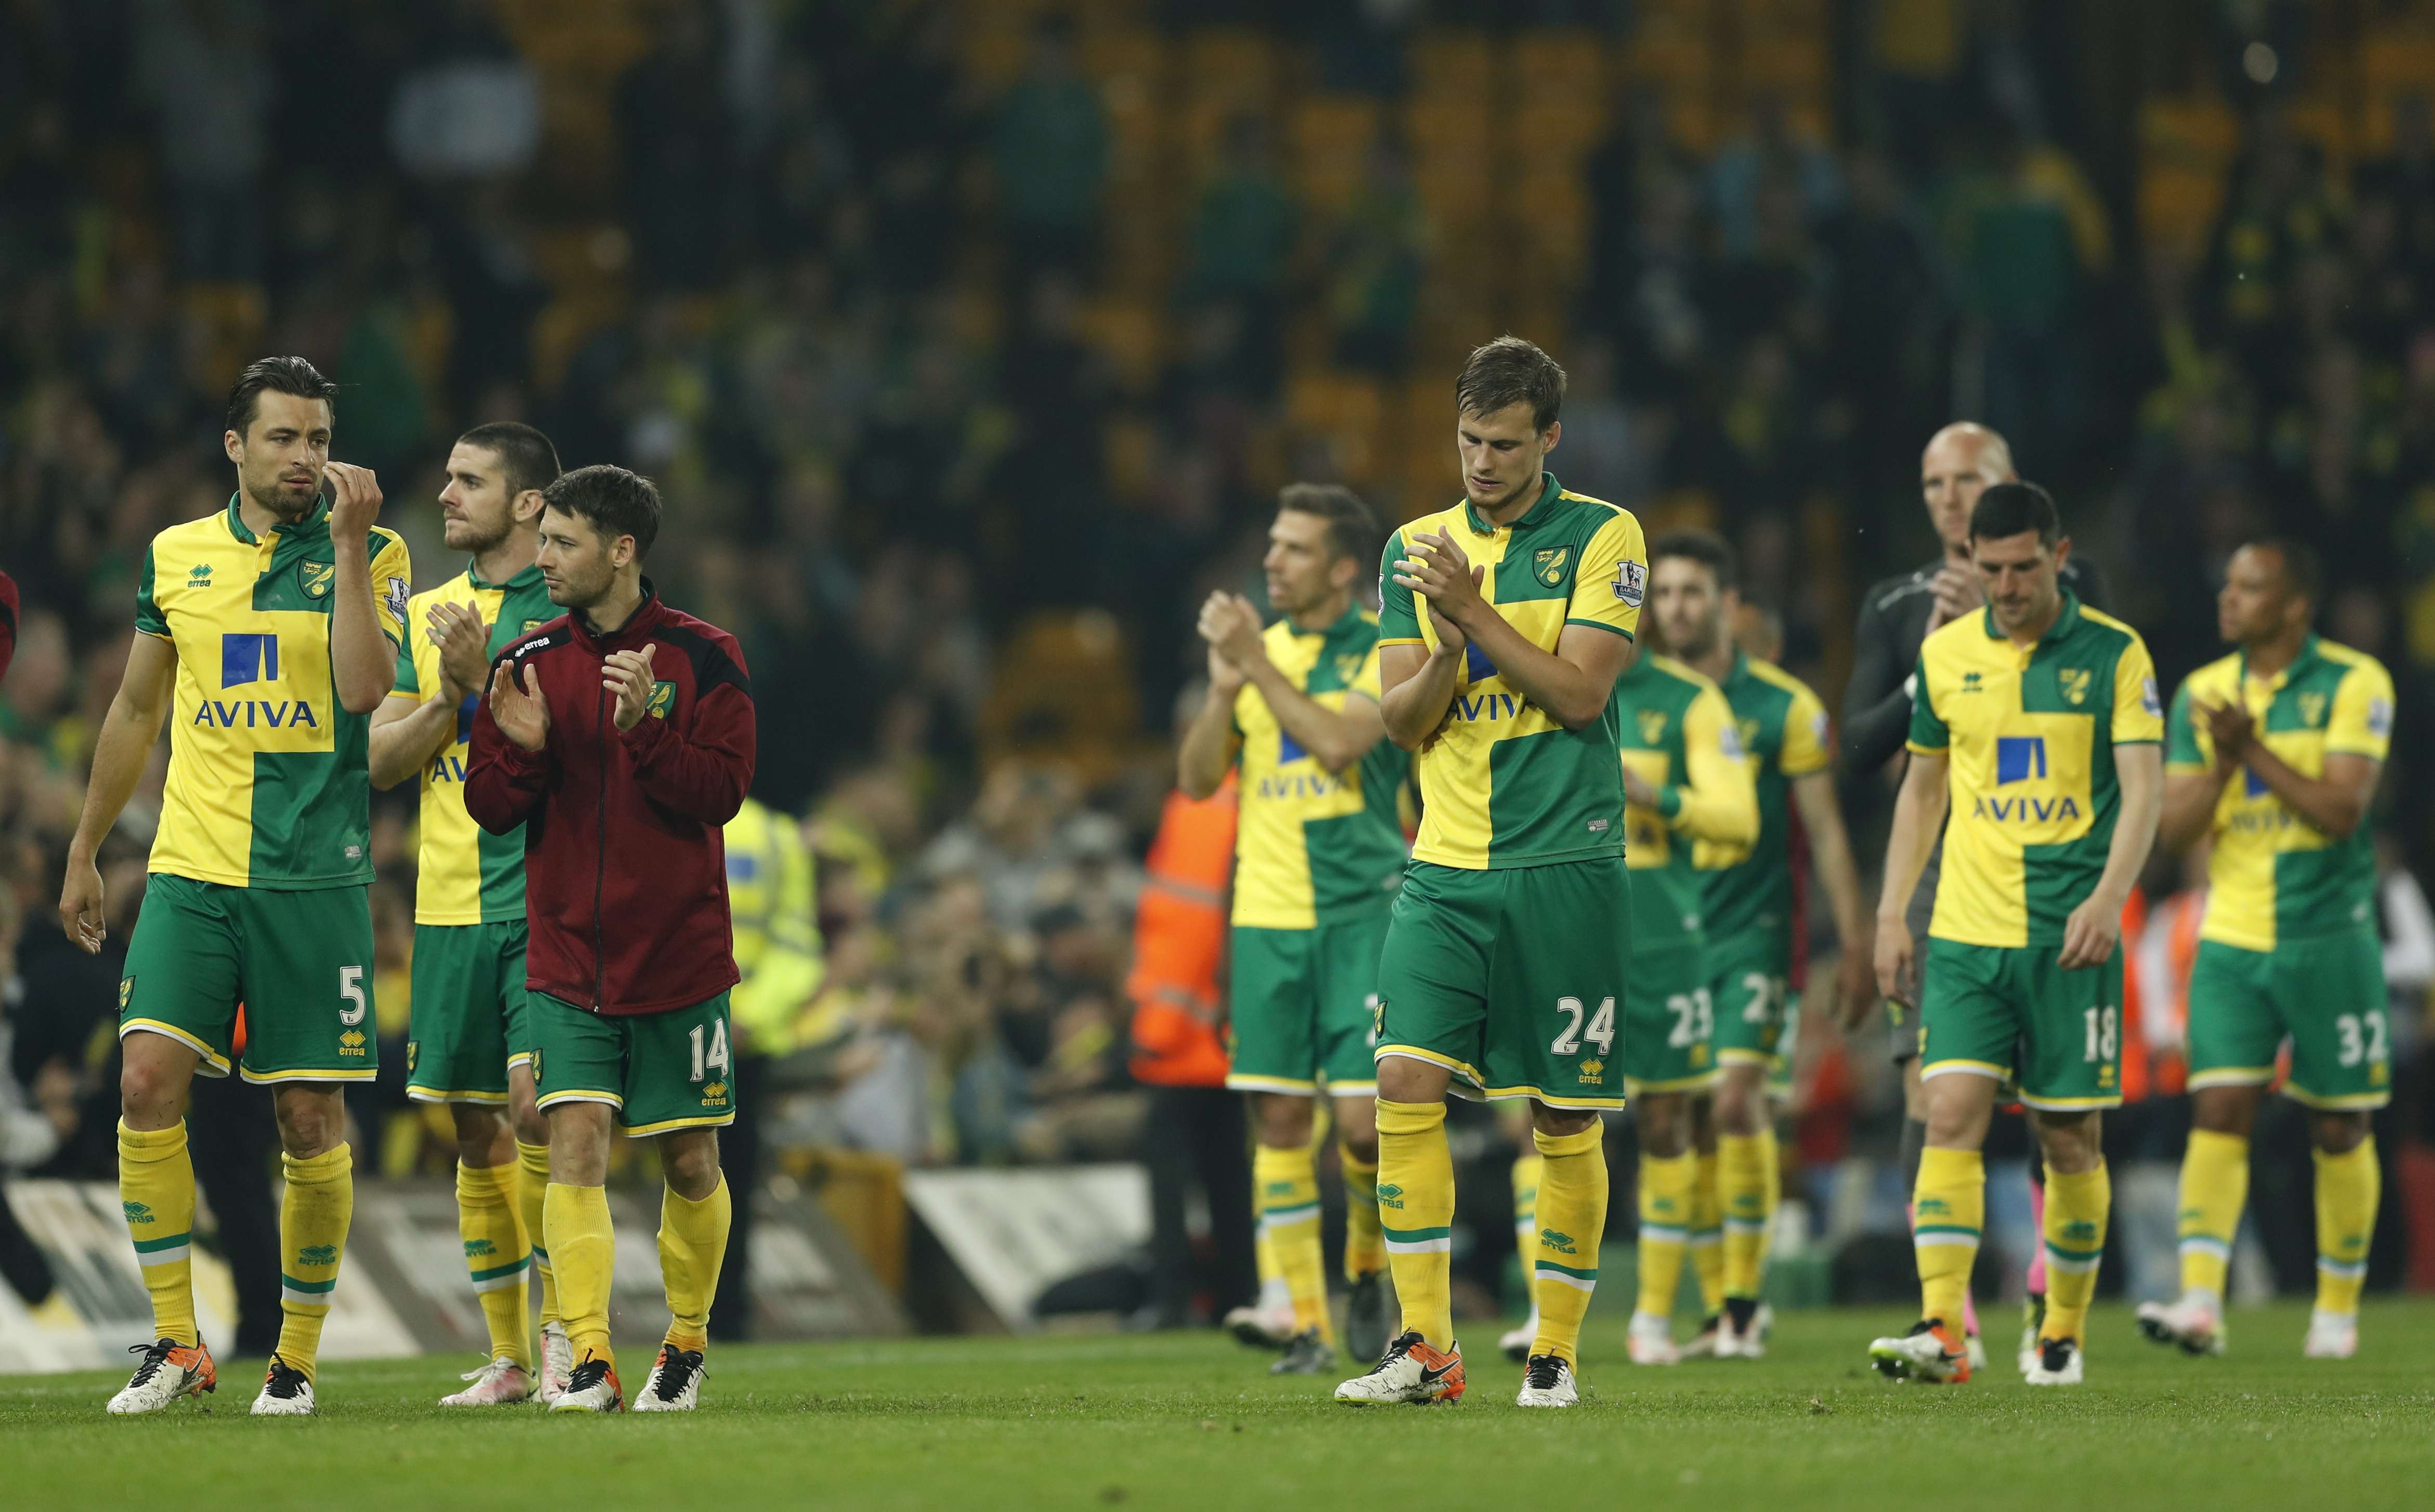 Norwich City players take a lap of honour after their final home game of the season after beating Watford. Photo: Reuters